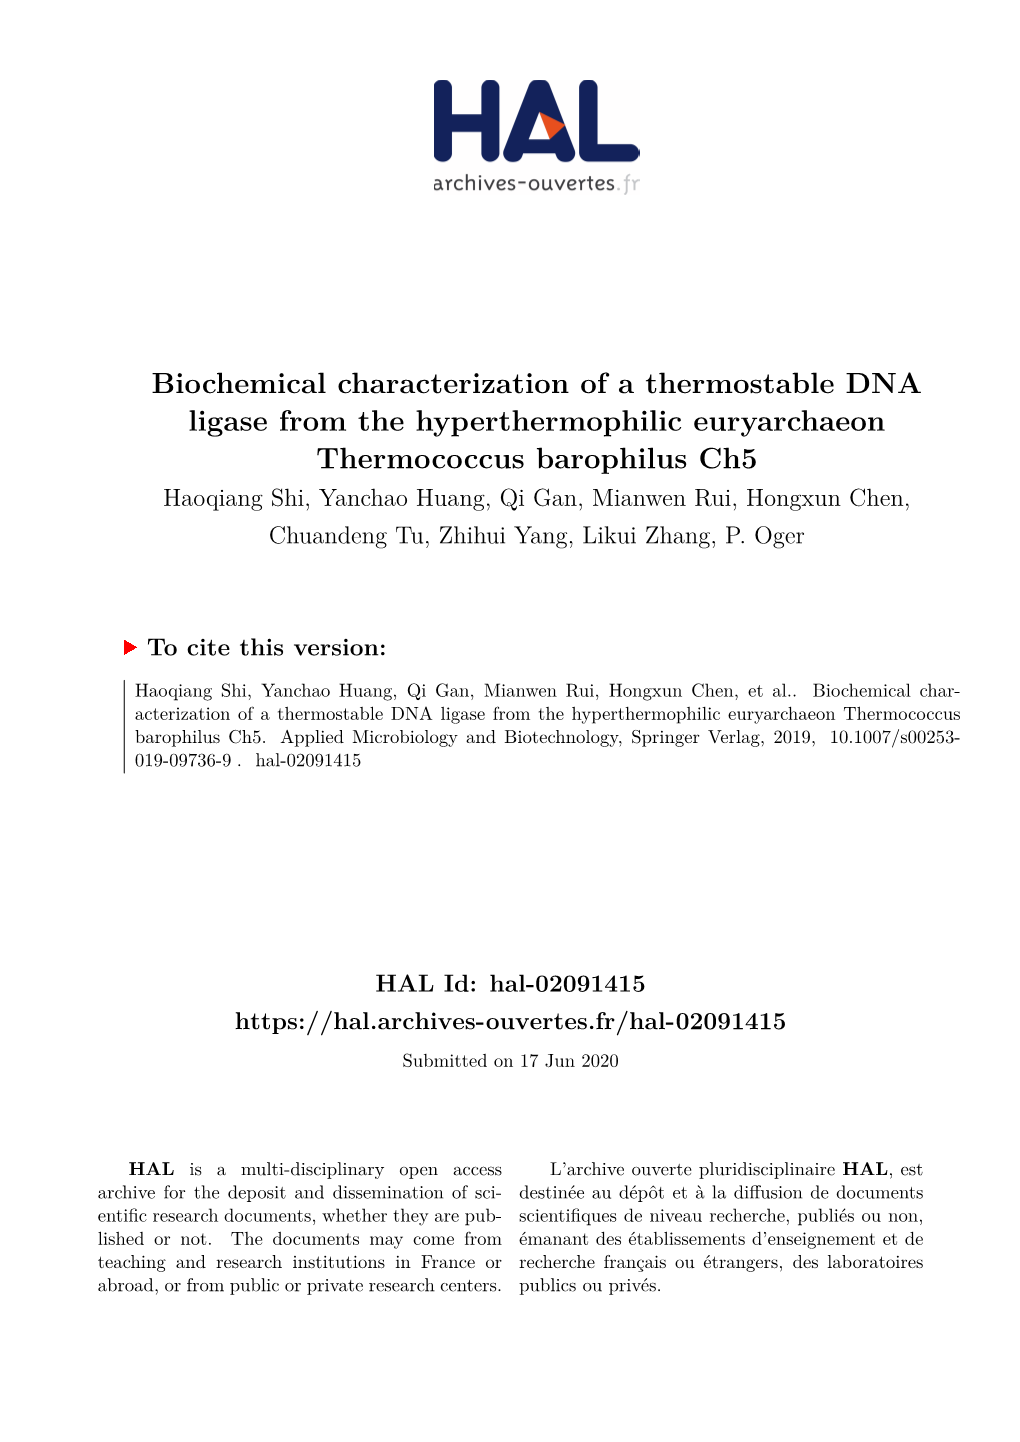 Biochemical Characterization of a Thermostable DNA Ligase from The